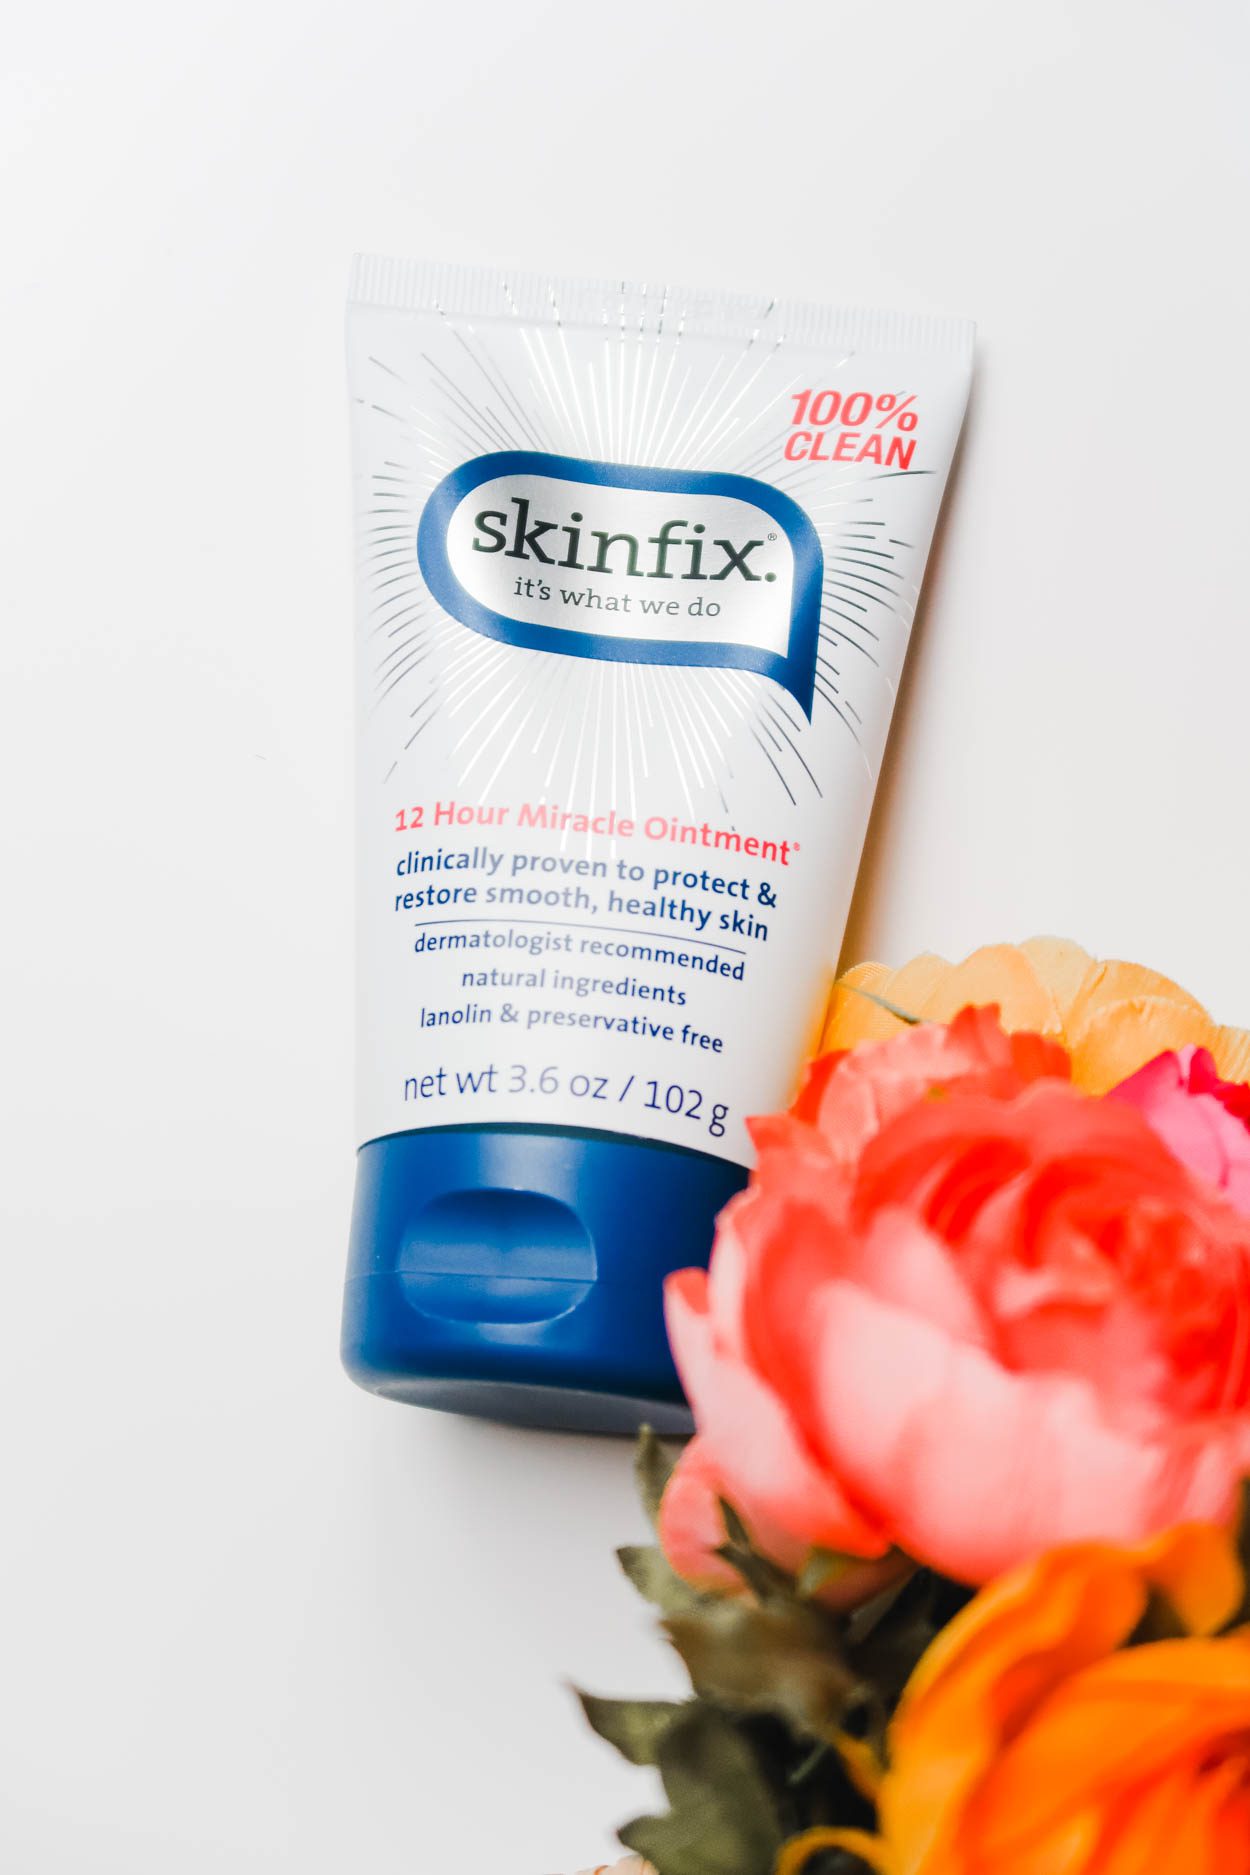 The Skinfix Exfoliate and Hydrate 3-Piece Kit is available on QVC. This 2-piece kit (plus bag) will help dry, irritated, rough skin. It features an exfoliant, moisturizer and renewing cream. #skincare #qvc #qvcbeauty #dryskin